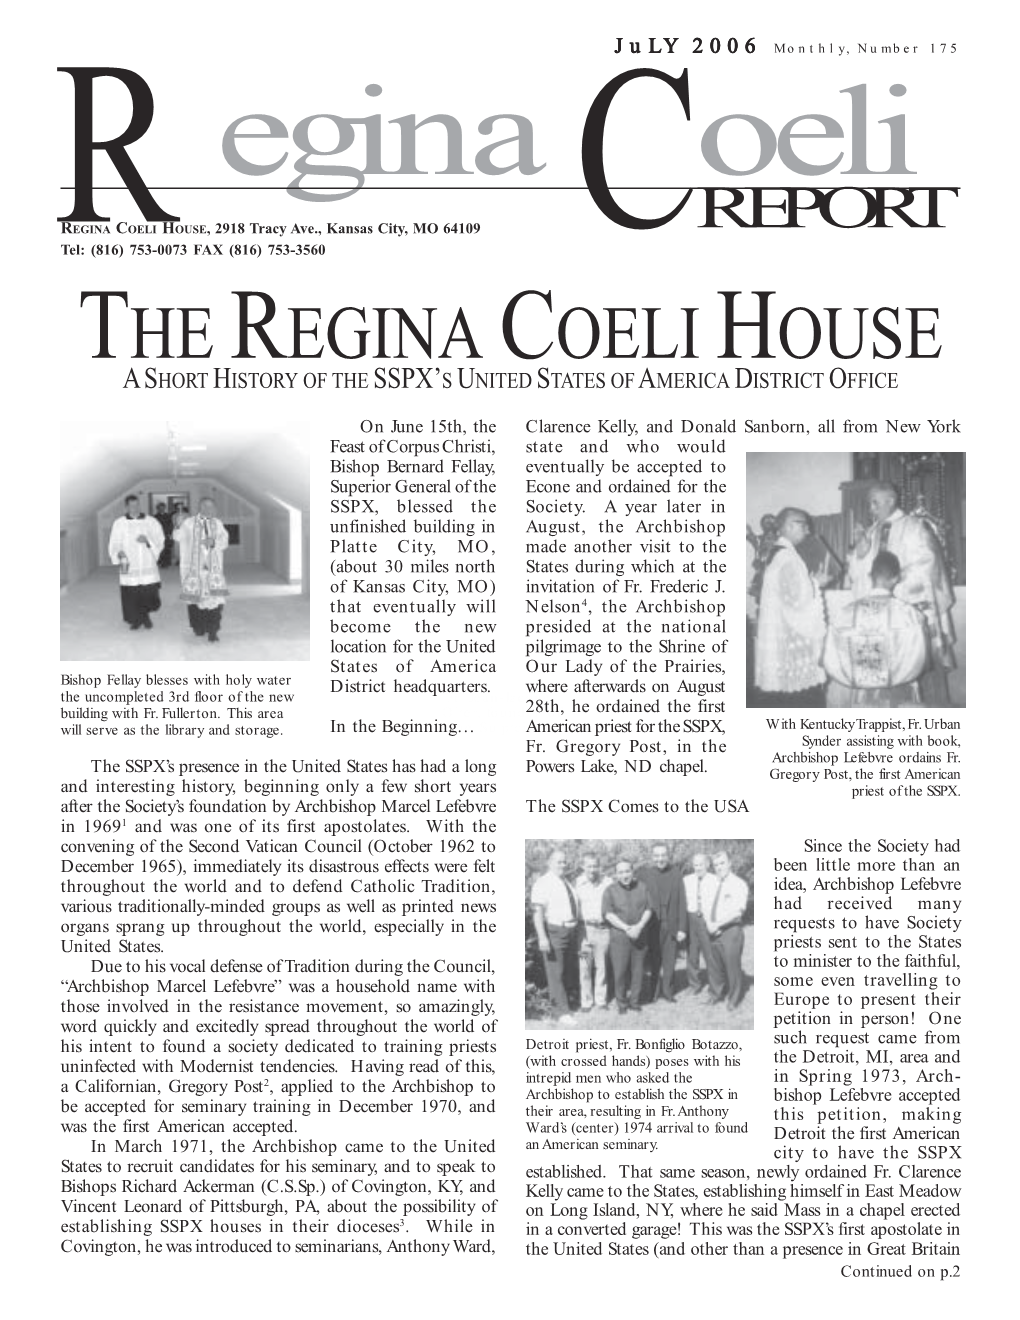 The Regina Coeli House a Short History of the Sspx’S United States of a Merica District Office